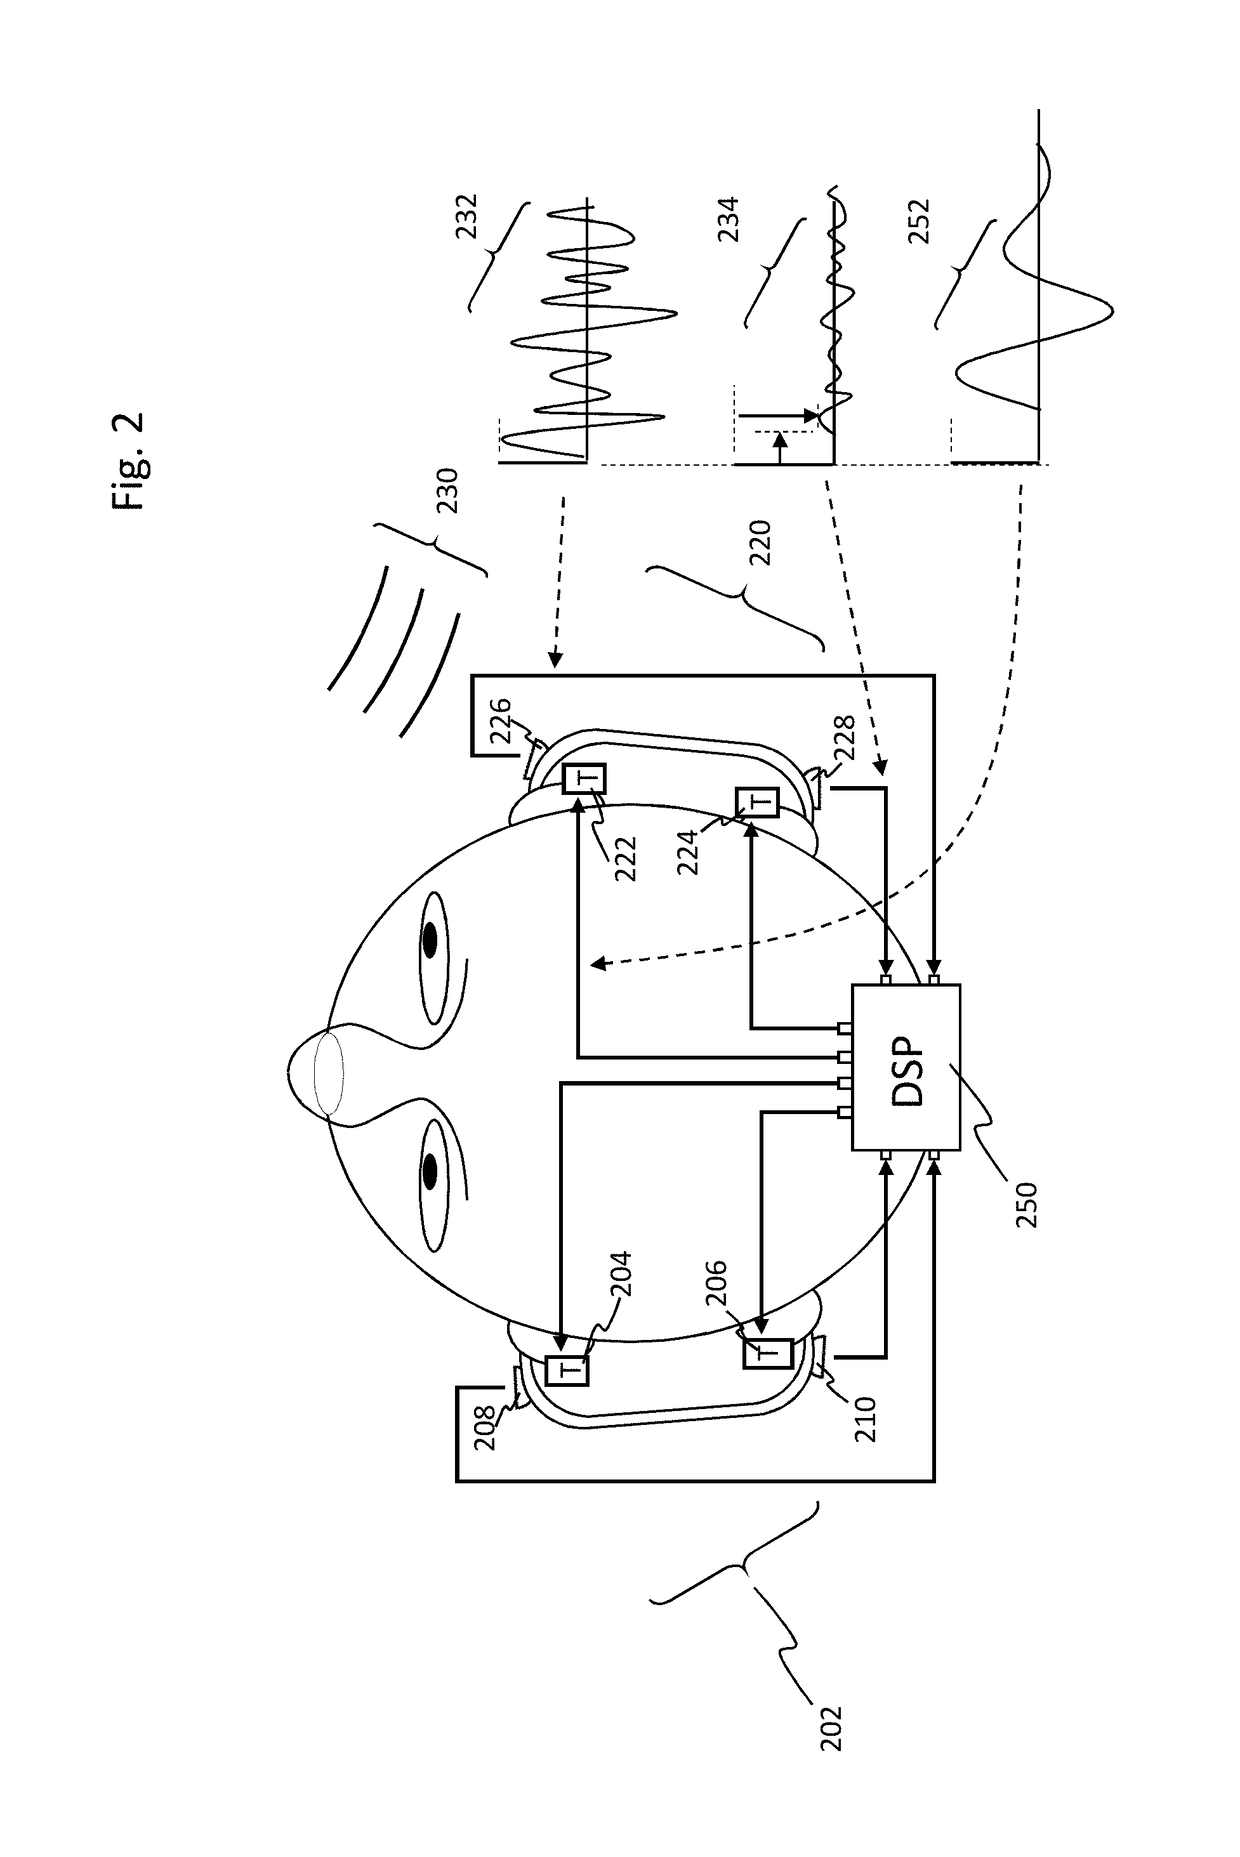 Apparatus and methods for audio-tactile spatialization of sound and perception of bass